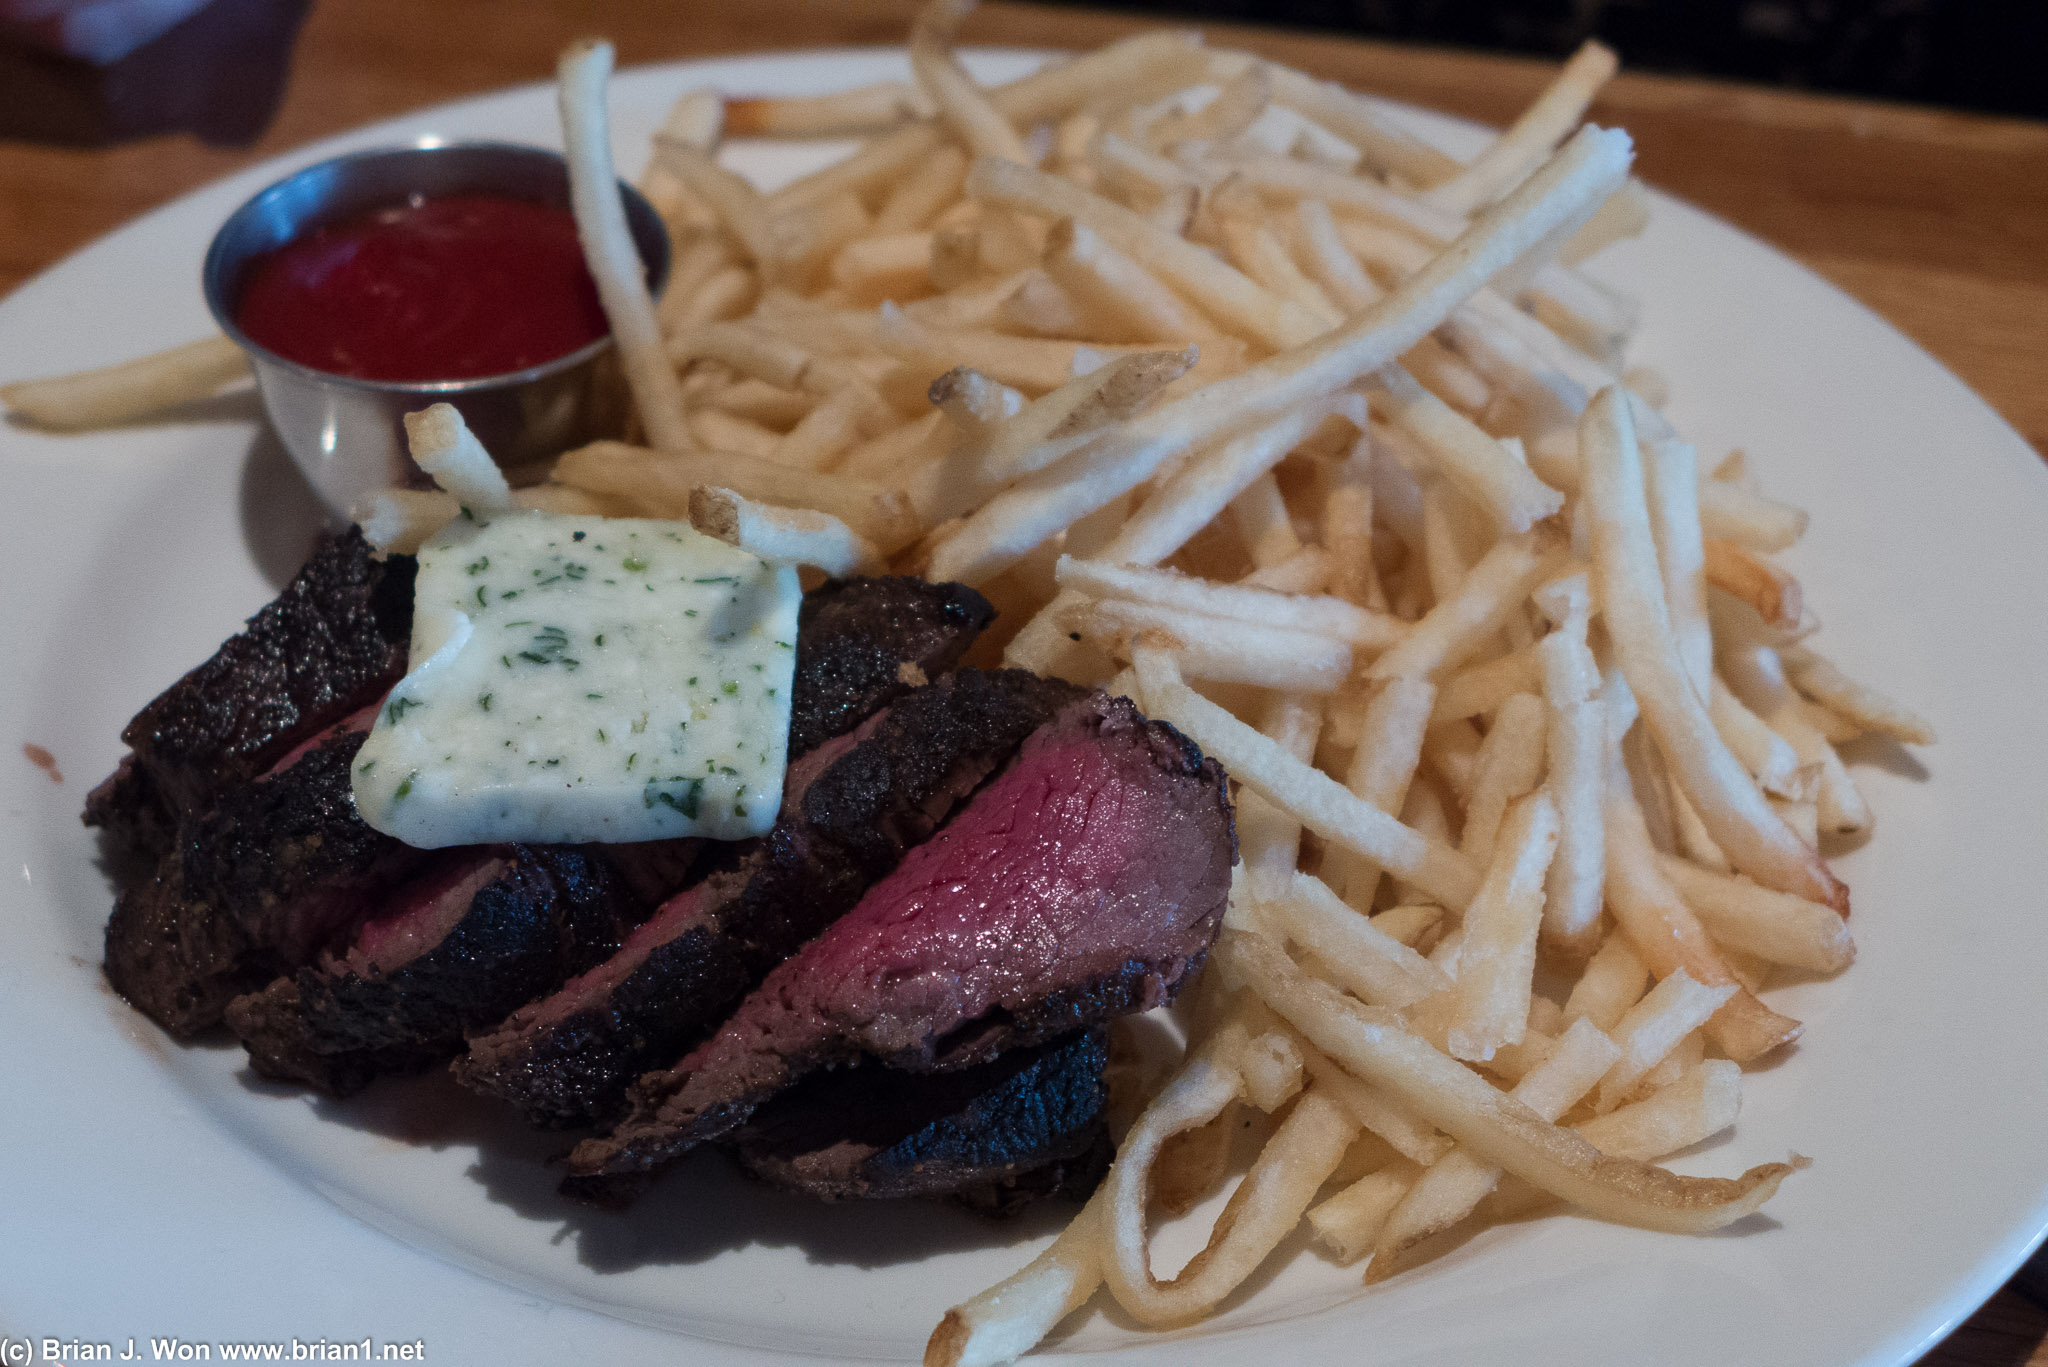 Steak and lots of fries.